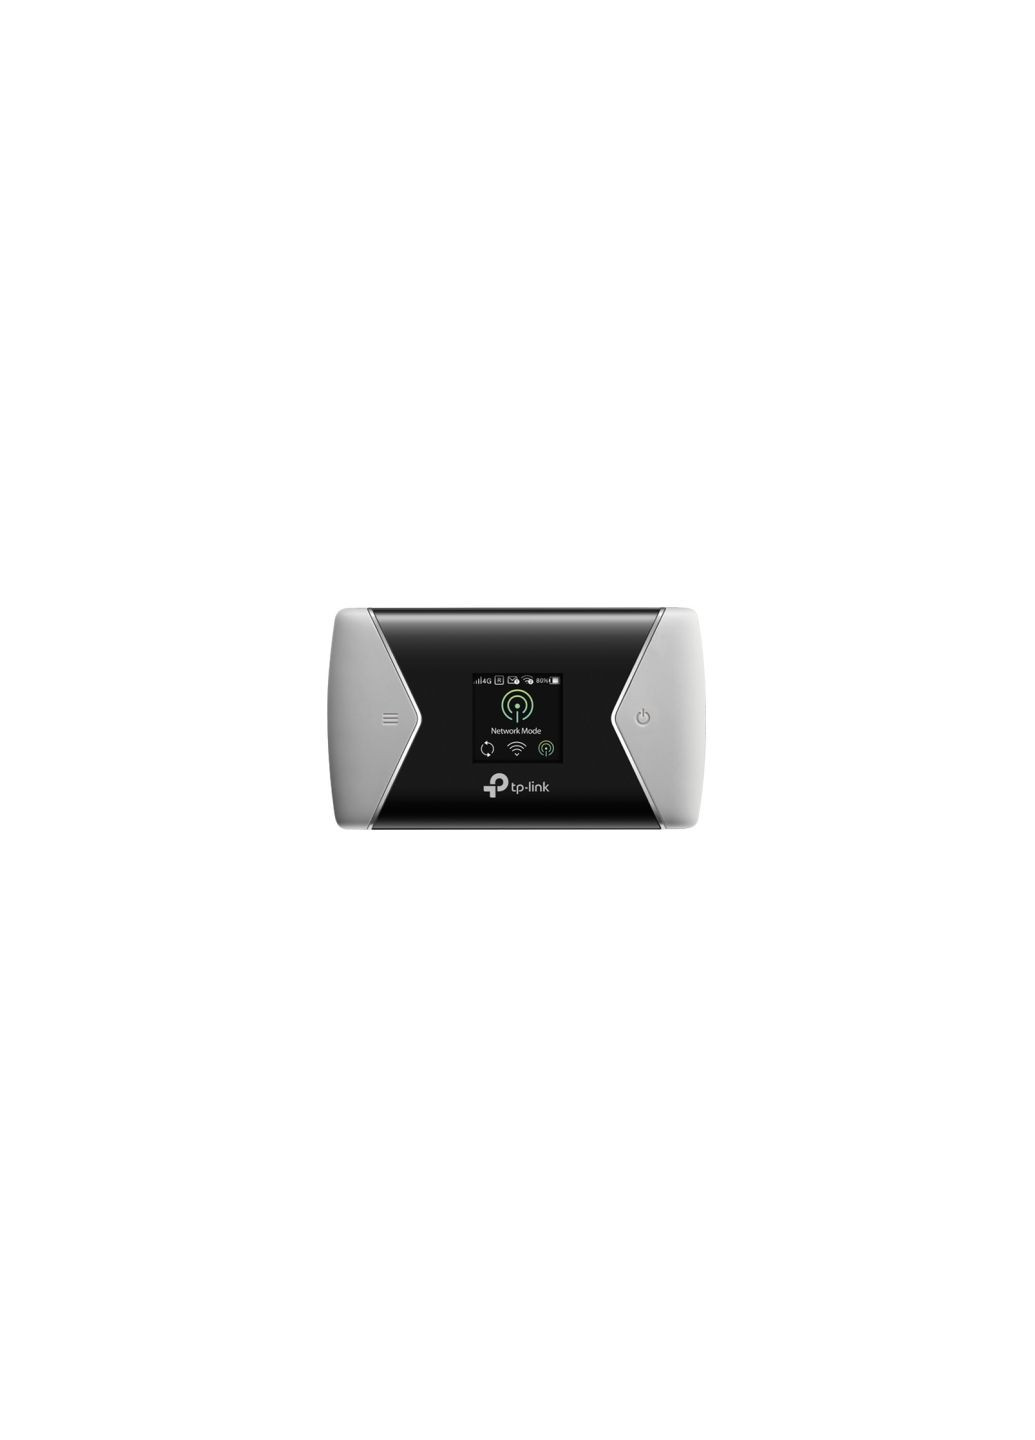 Маршрутизатор TP-Link m7450 (276905334)